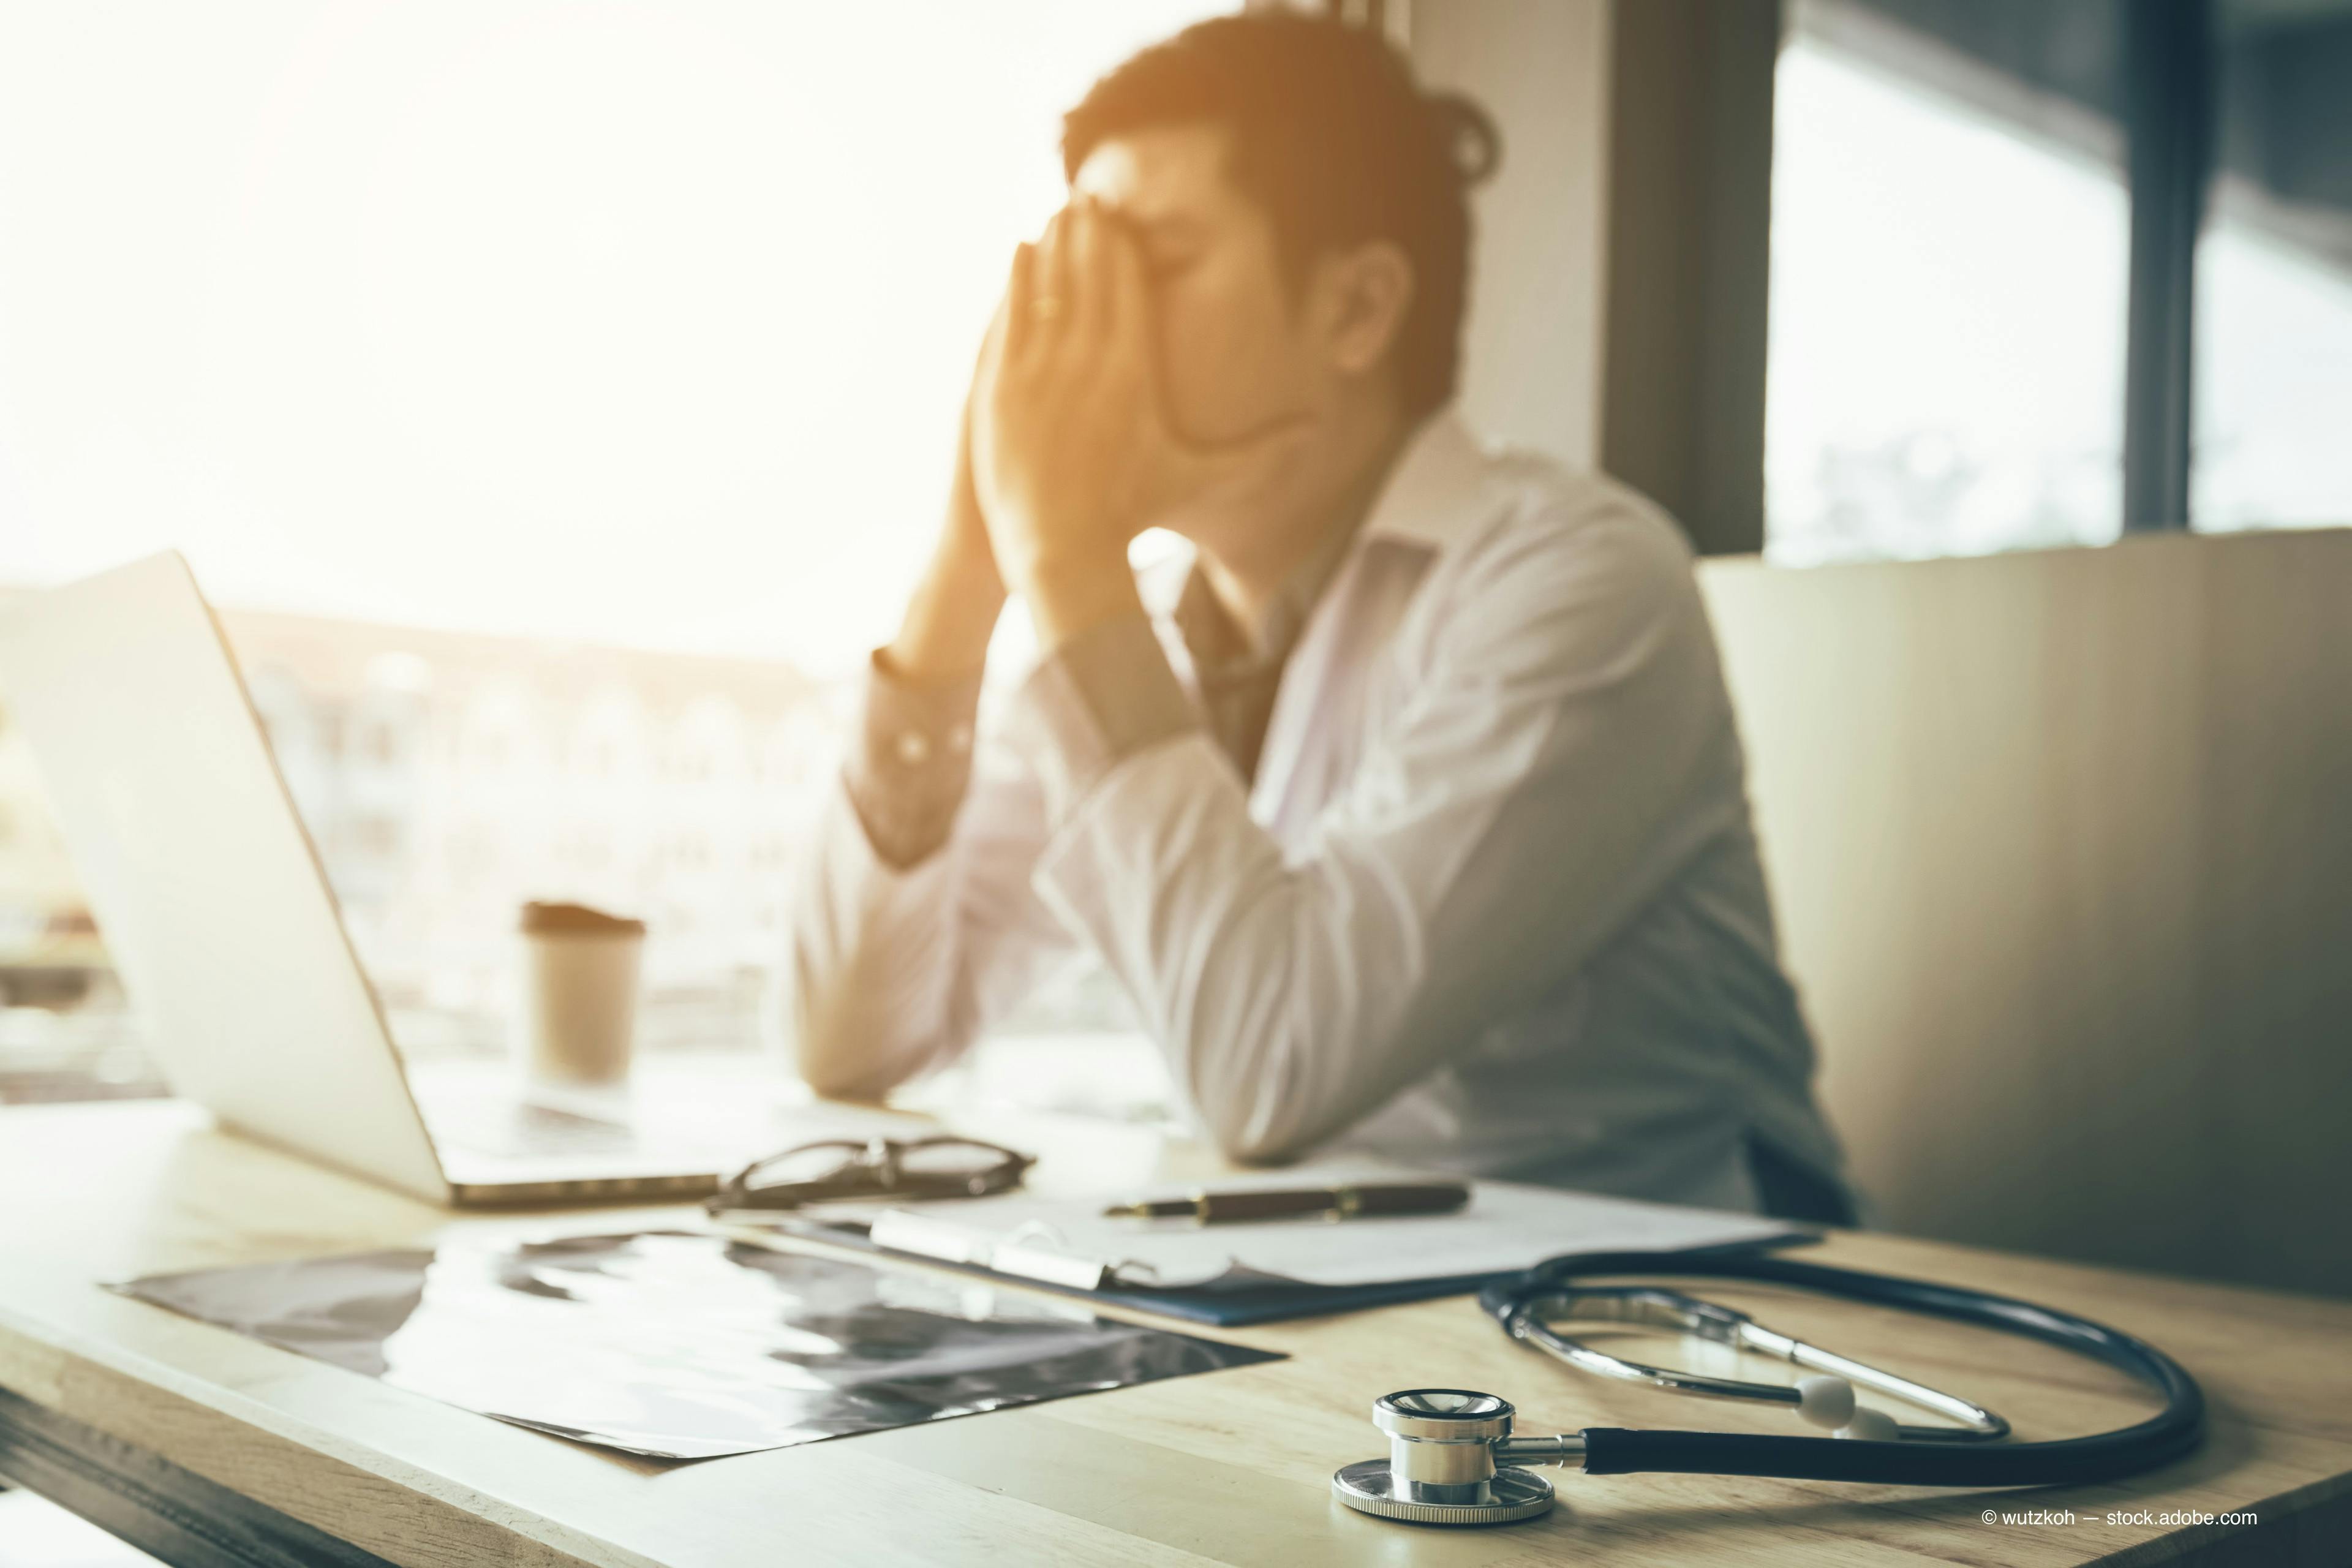 Solving physician burnout solution requires system-wide changes